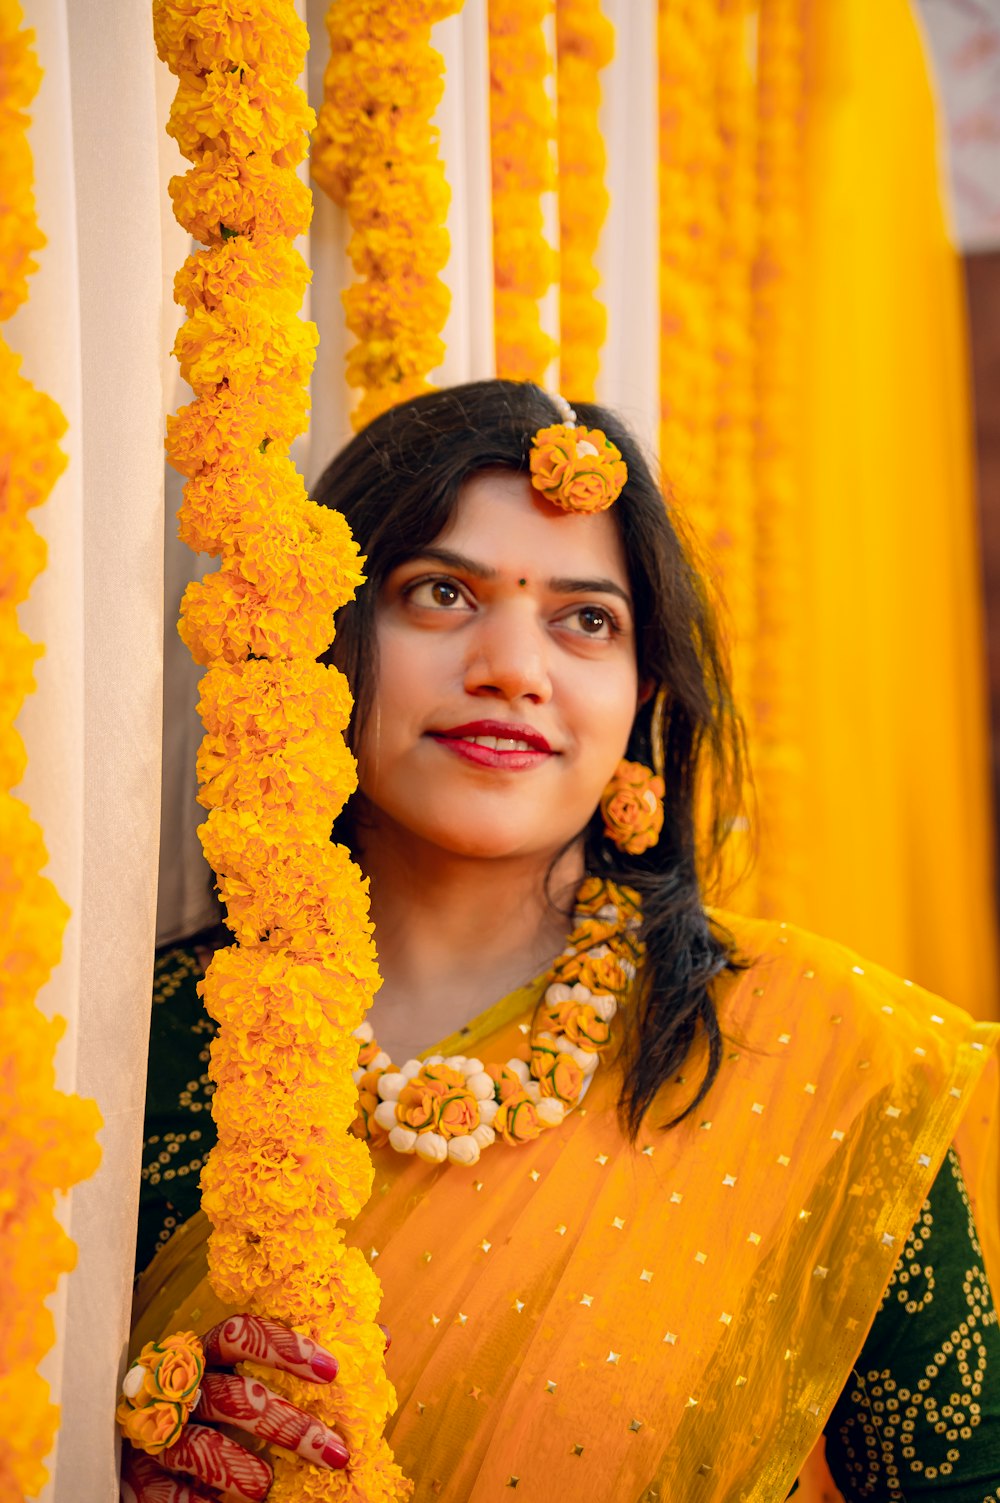 a woman in a yellow sari holding a garland